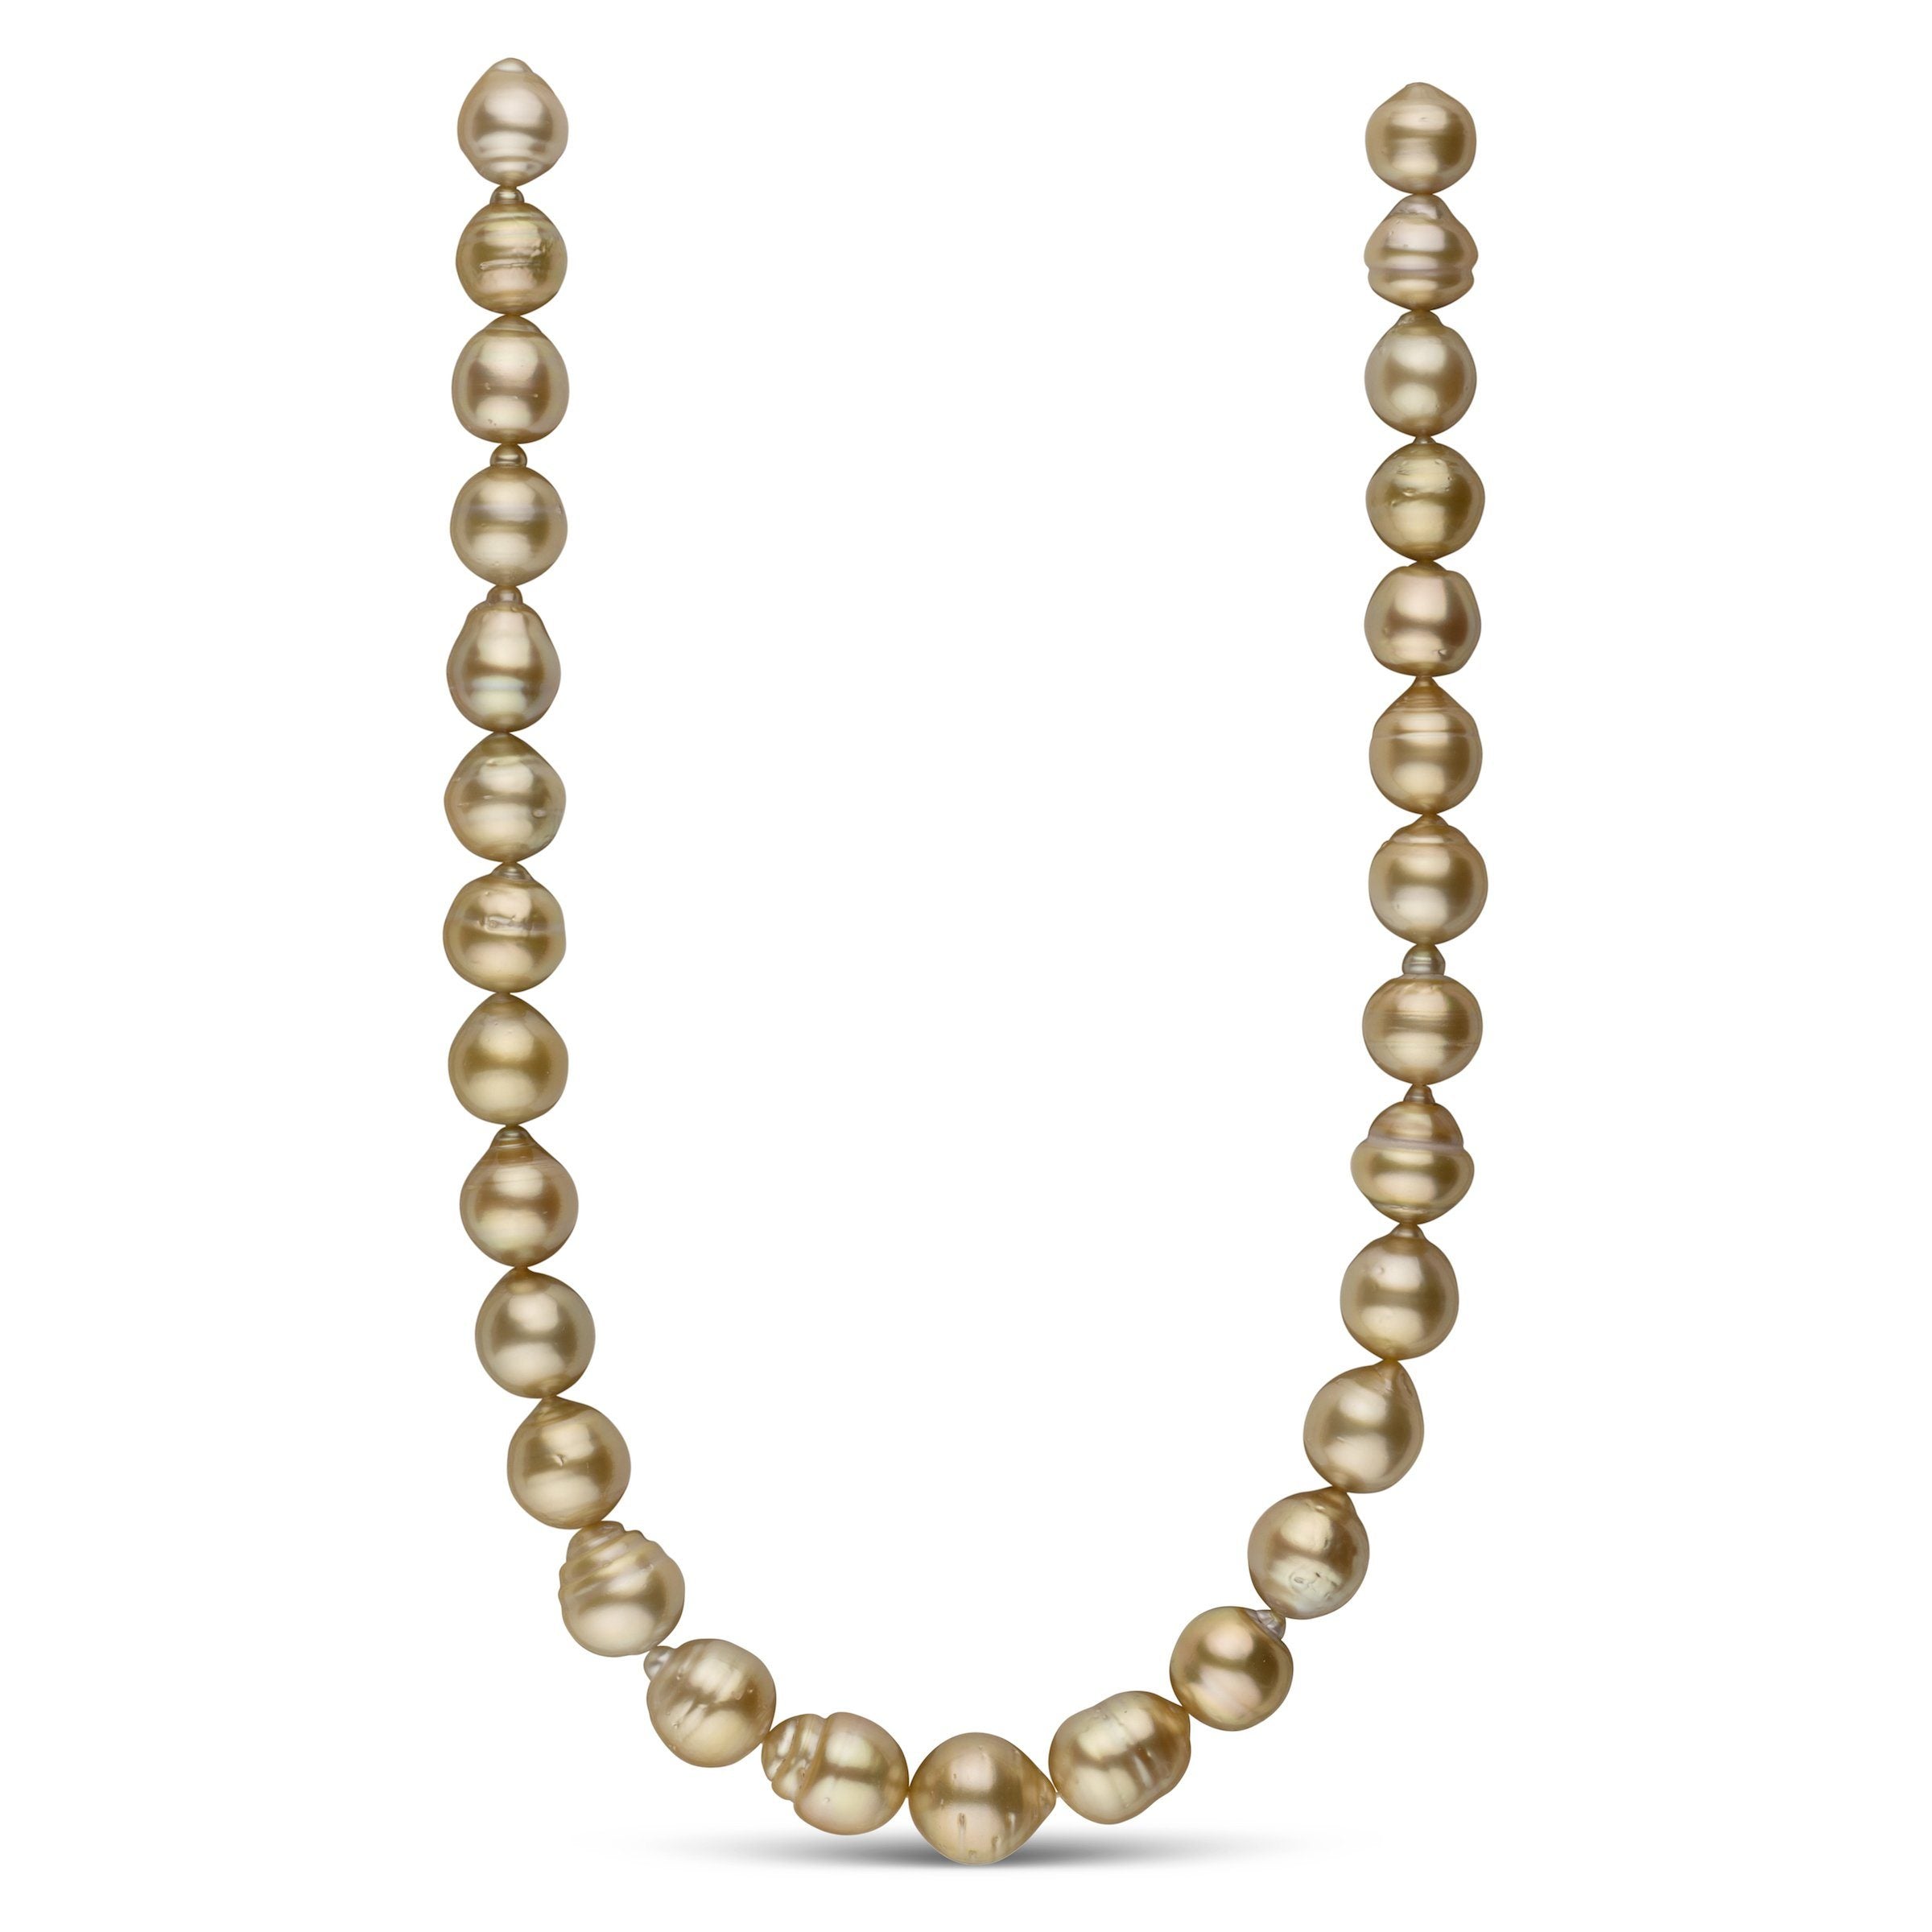 12.0-14.4 mm AA+ Golden South Sea Baroque Pearl Necklace